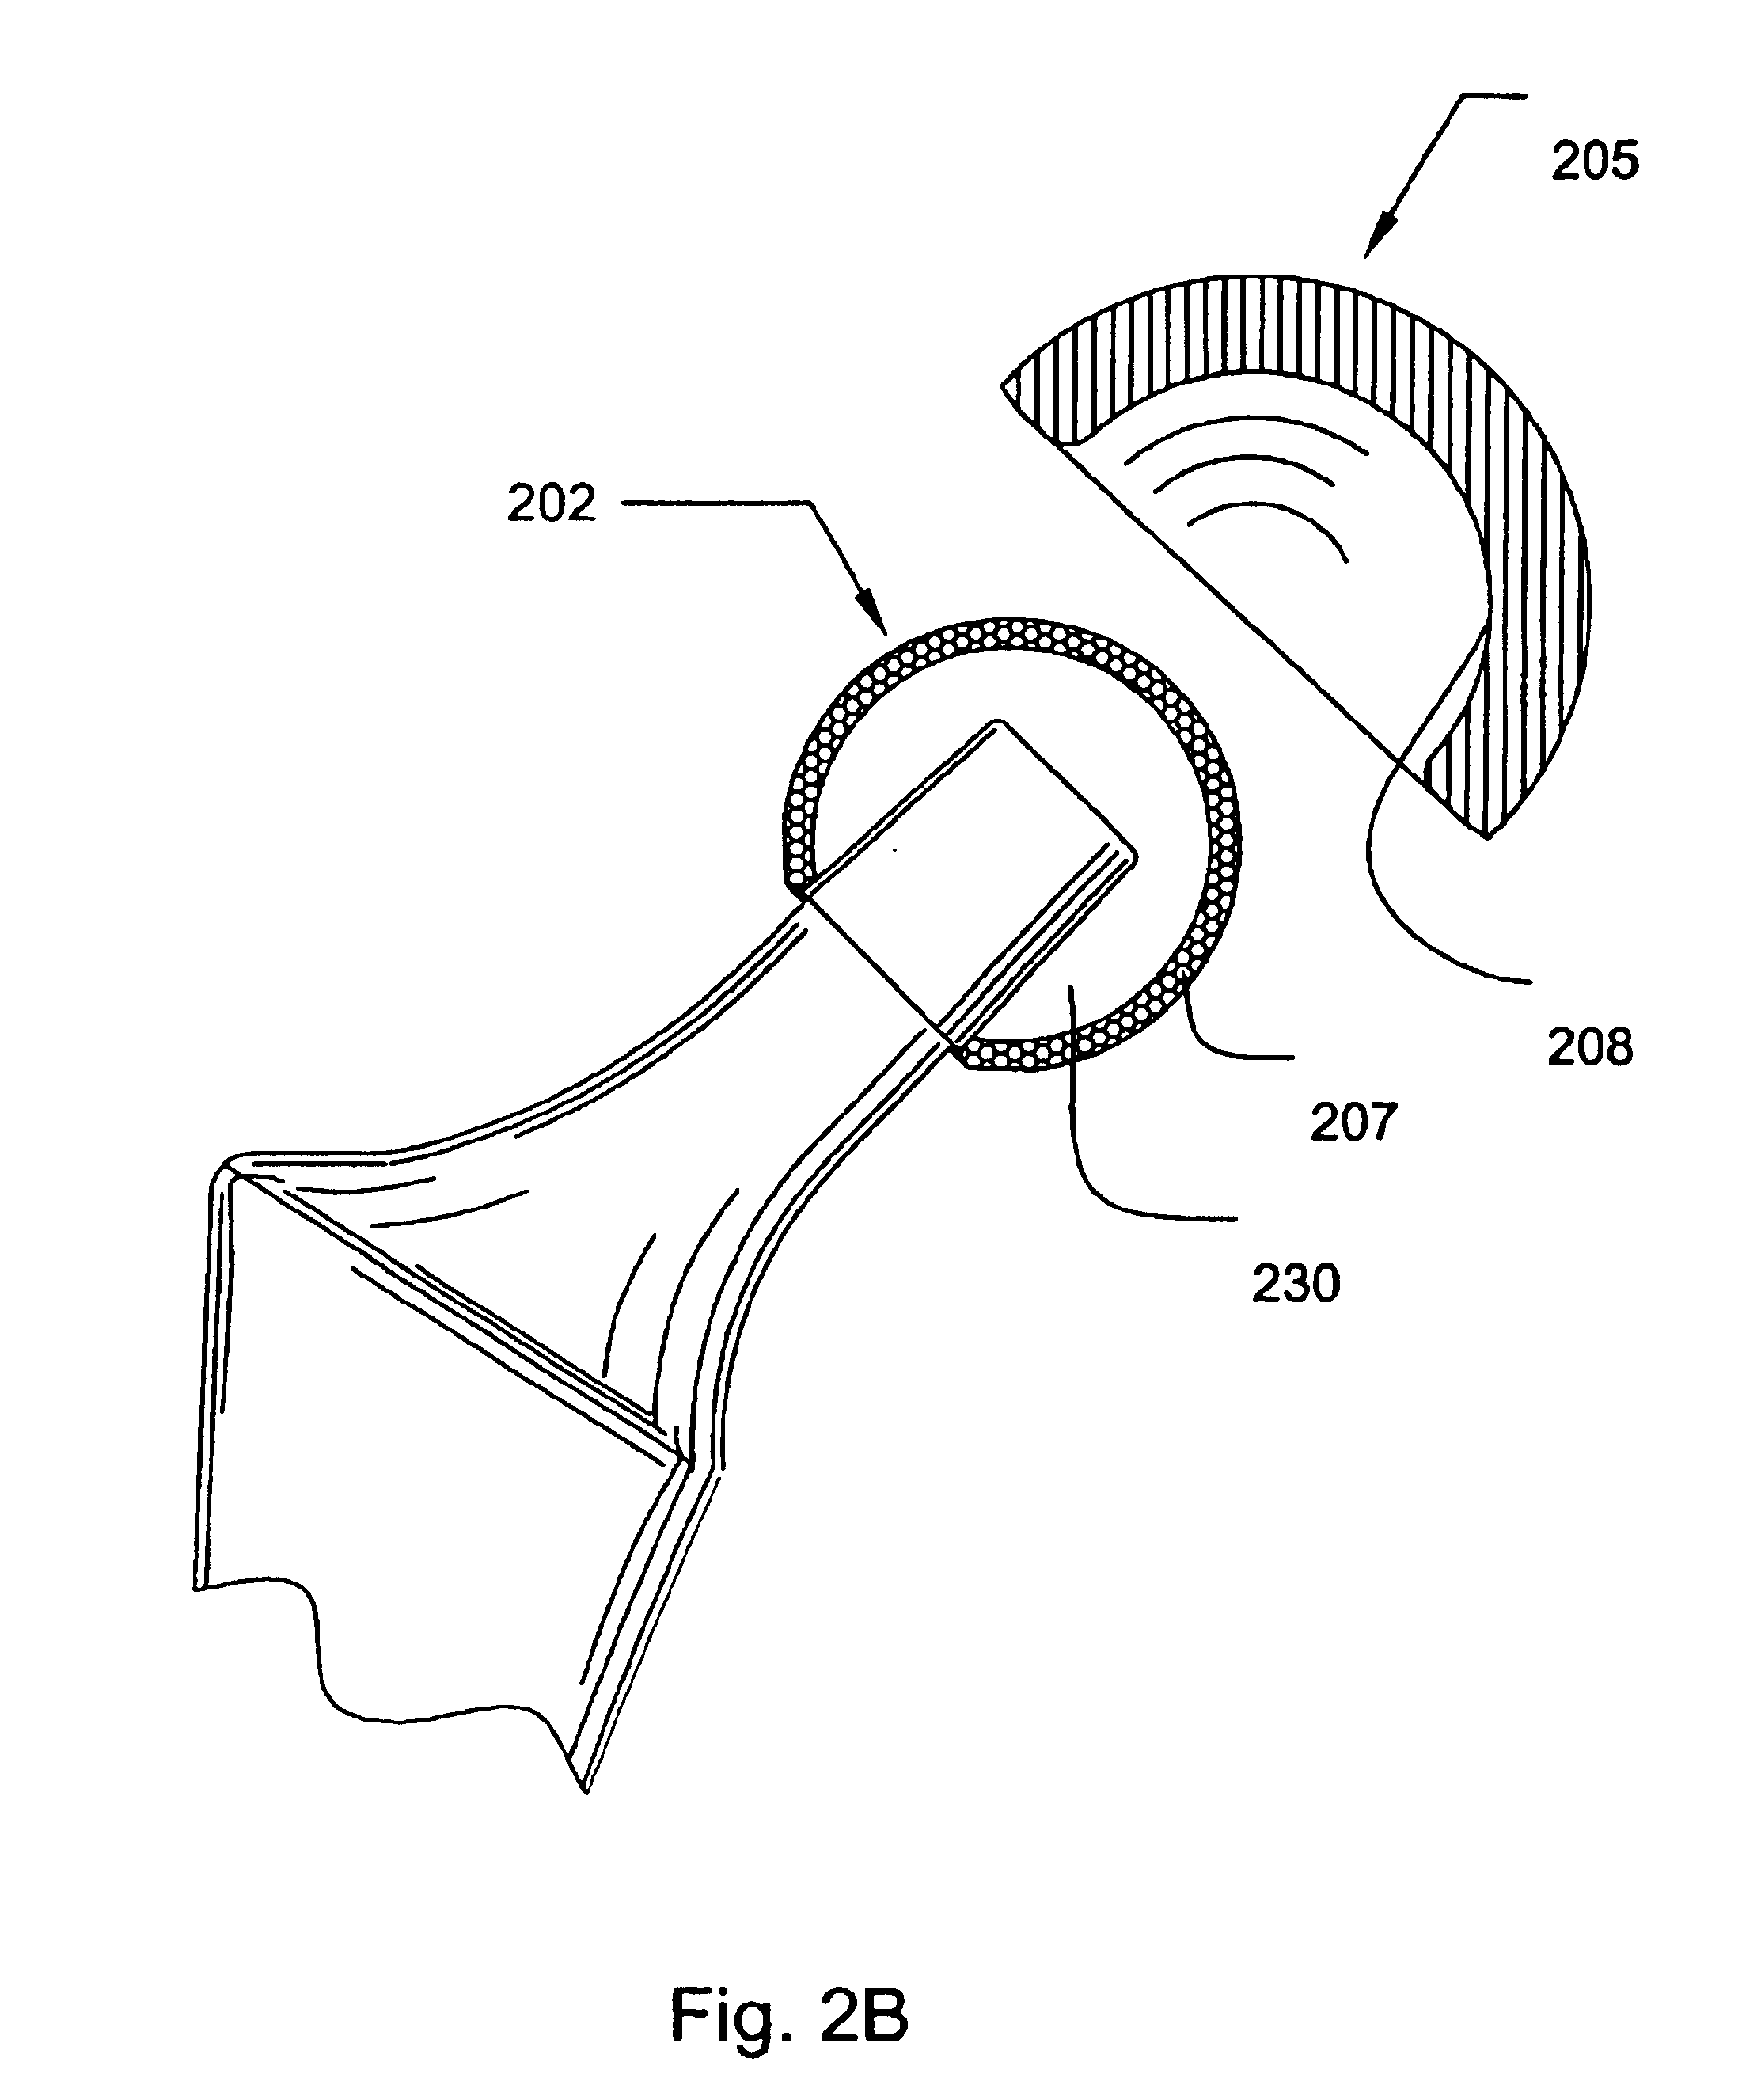 Prosthetic hip joint having a polycrystalline diamond articulation surface and a plurality of substrate layers